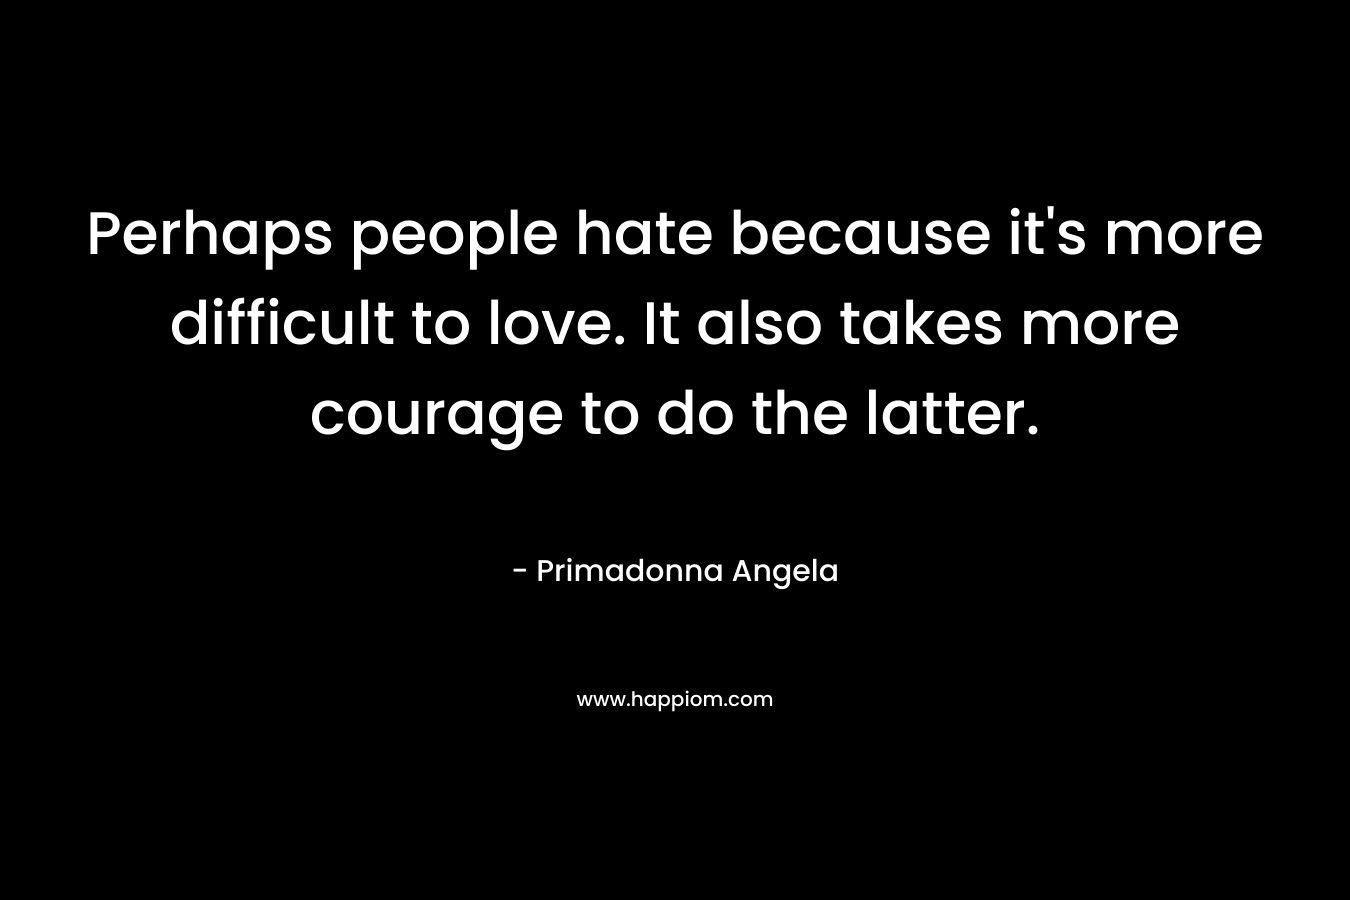 Perhaps people hate because it’s more difficult to love. It also takes more courage to do the latter. – Primadonna Angela